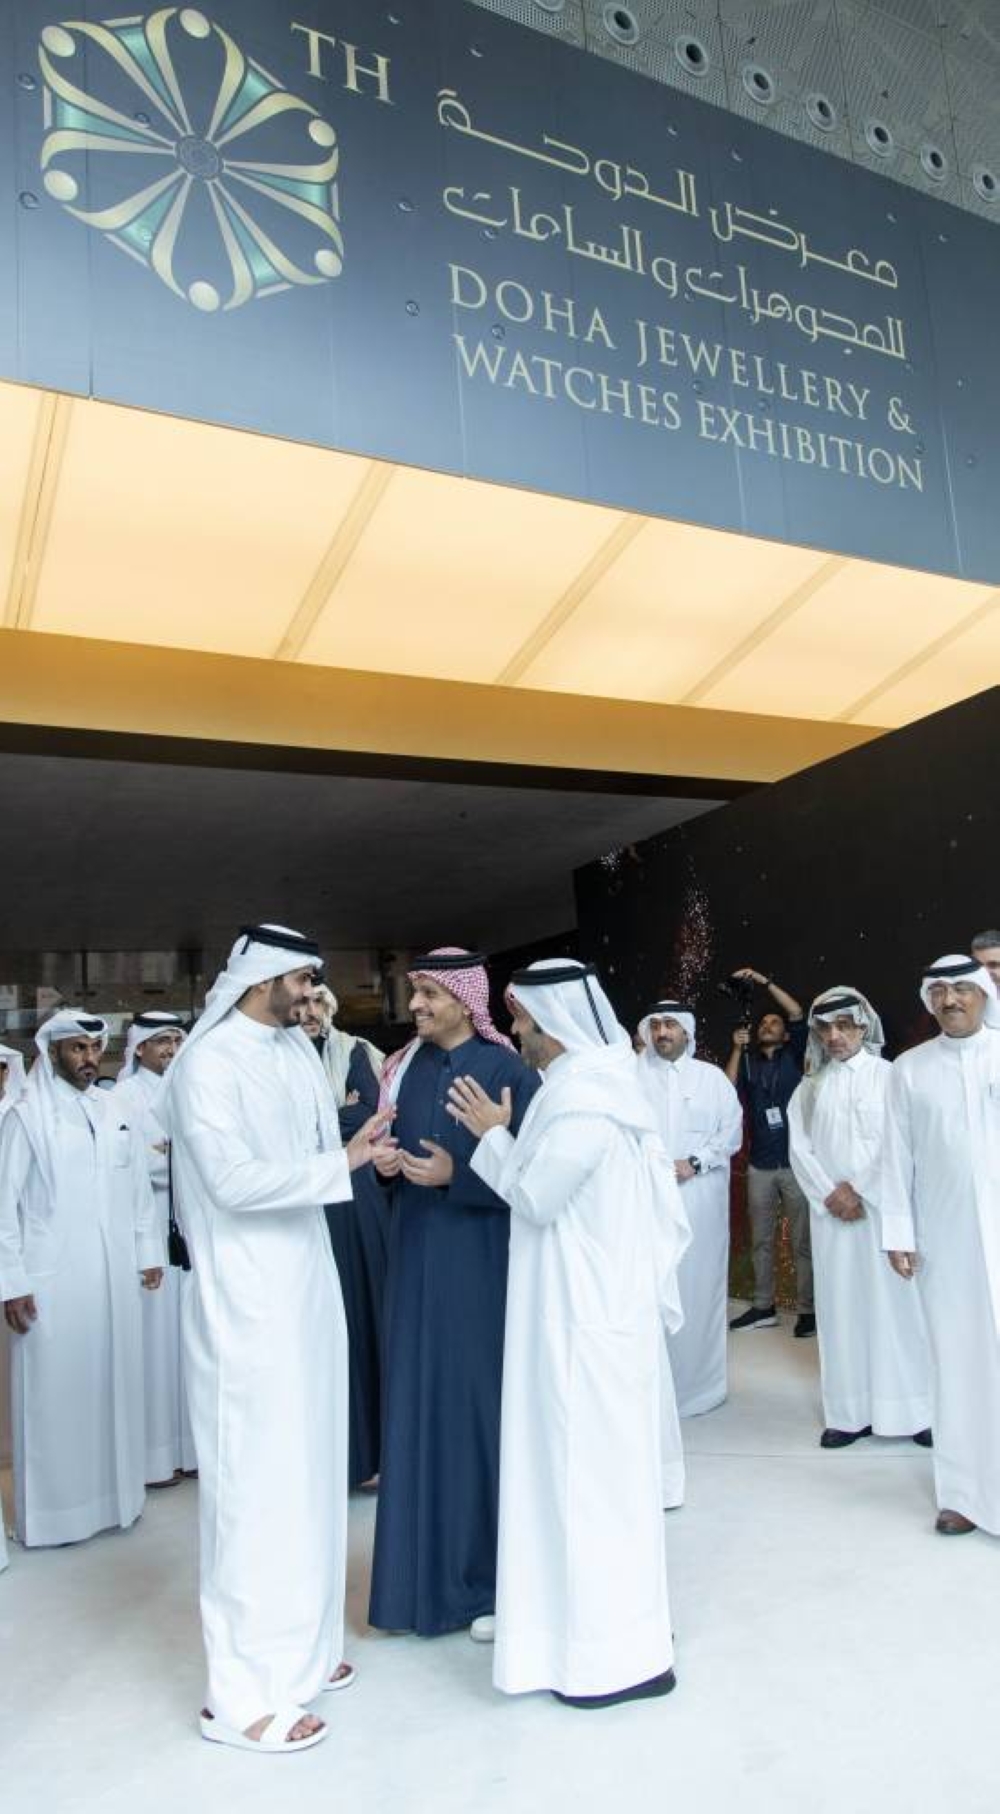 Doha Jewellery and Watches Exhibition | Qatar Events